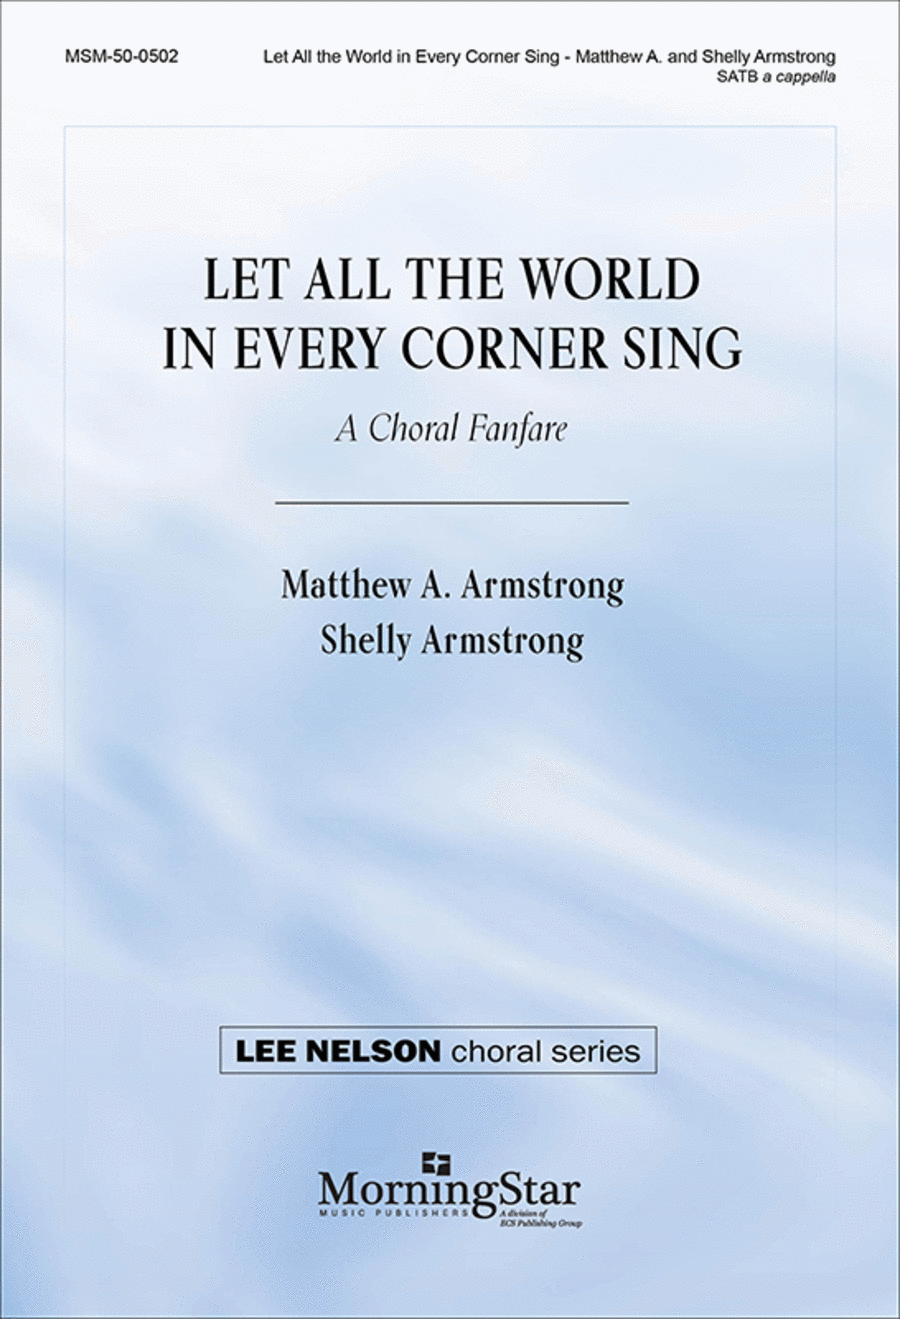 Let All the World in Every Corner Sing: A Choral Fanfare